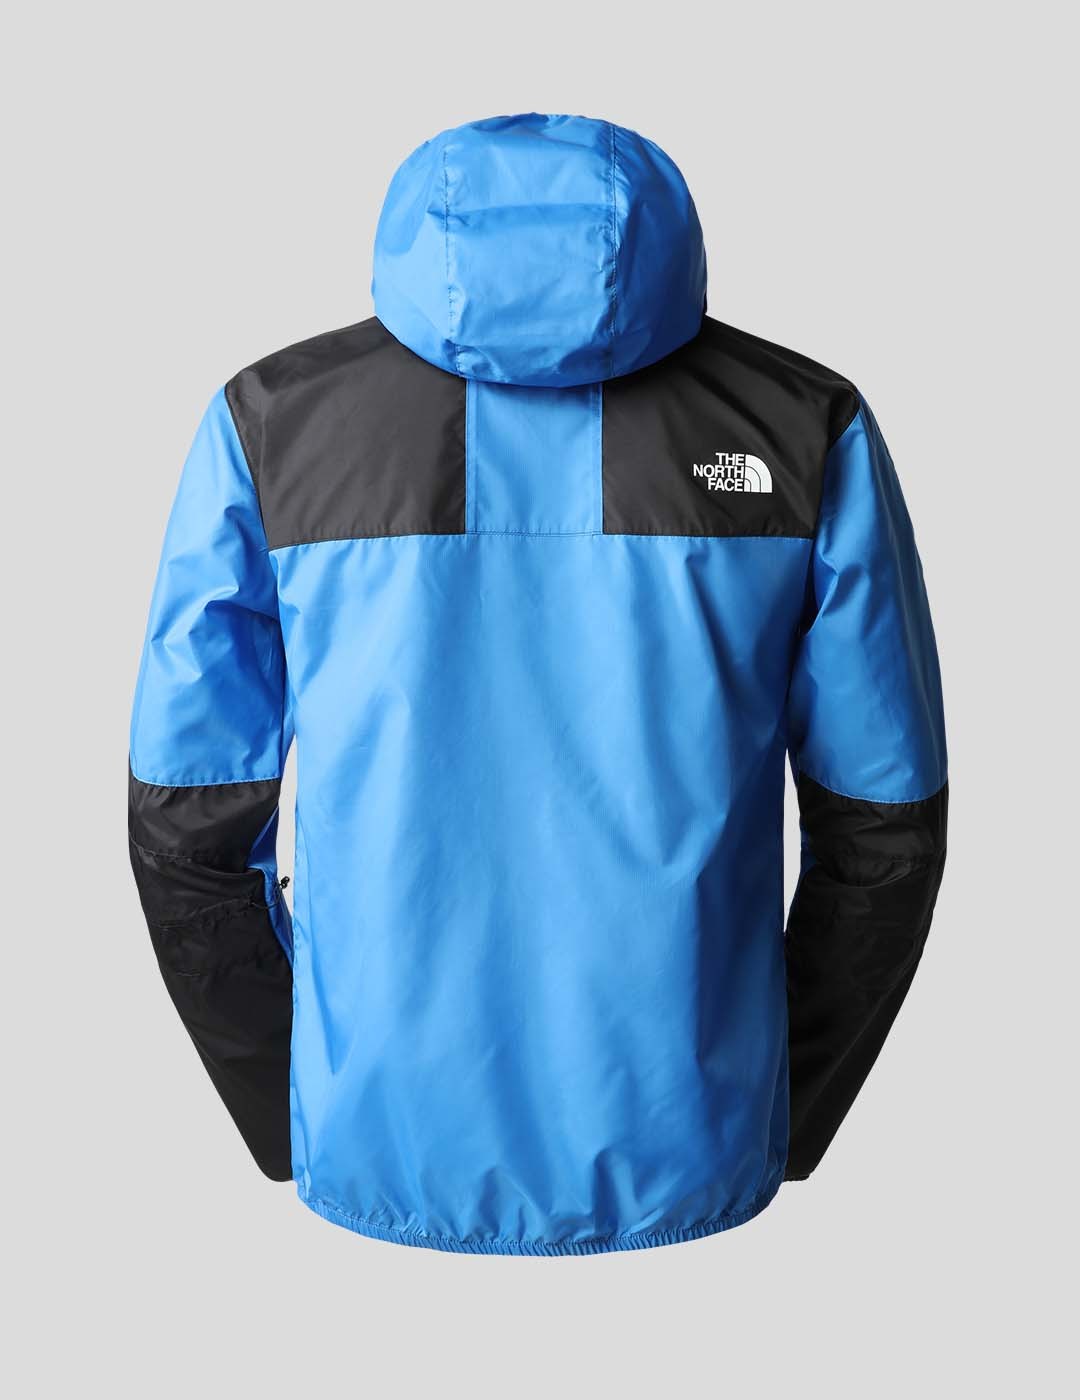 CHAQUETA THE NORTH FACE MOUNTAIN JACKET SUPER SONIC BLUE